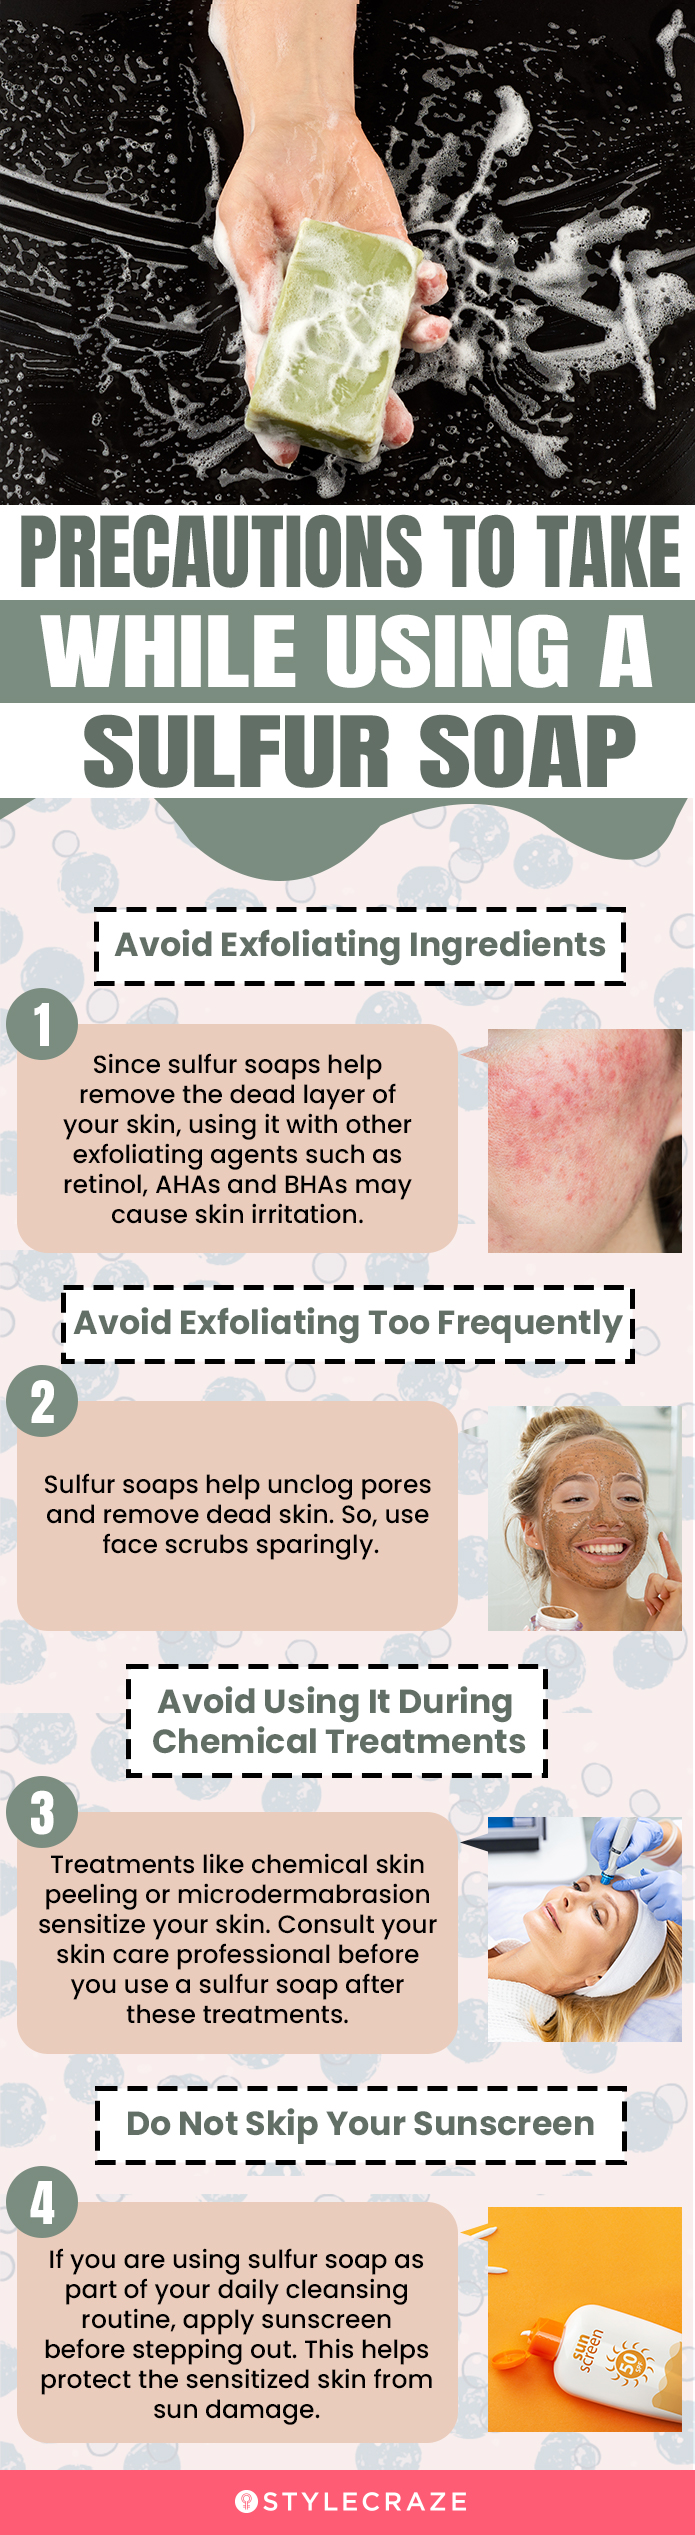 Precautions To Take While Using A Sulfur Soap(infographic)